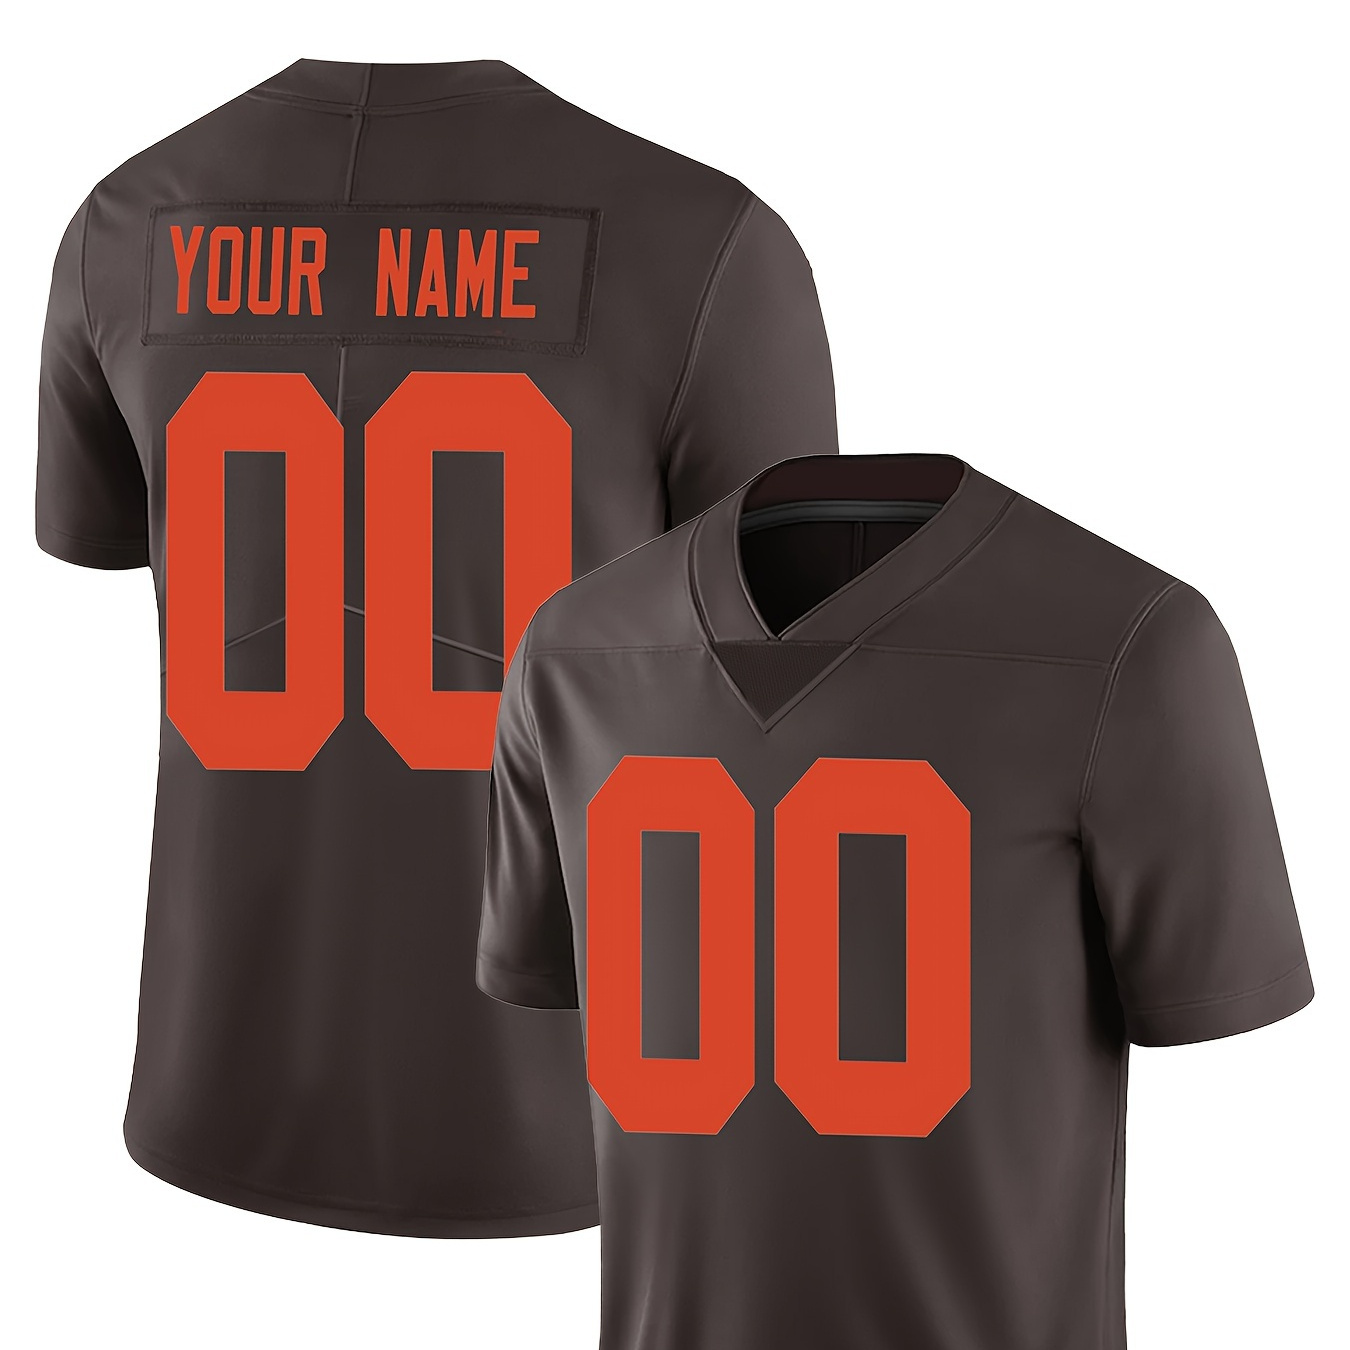 

Personalized Name And Number Embroidery Men's Short Sleeve Loose V-neck American Football Jersey, Retro Style Rugby Jersey For Summer Training